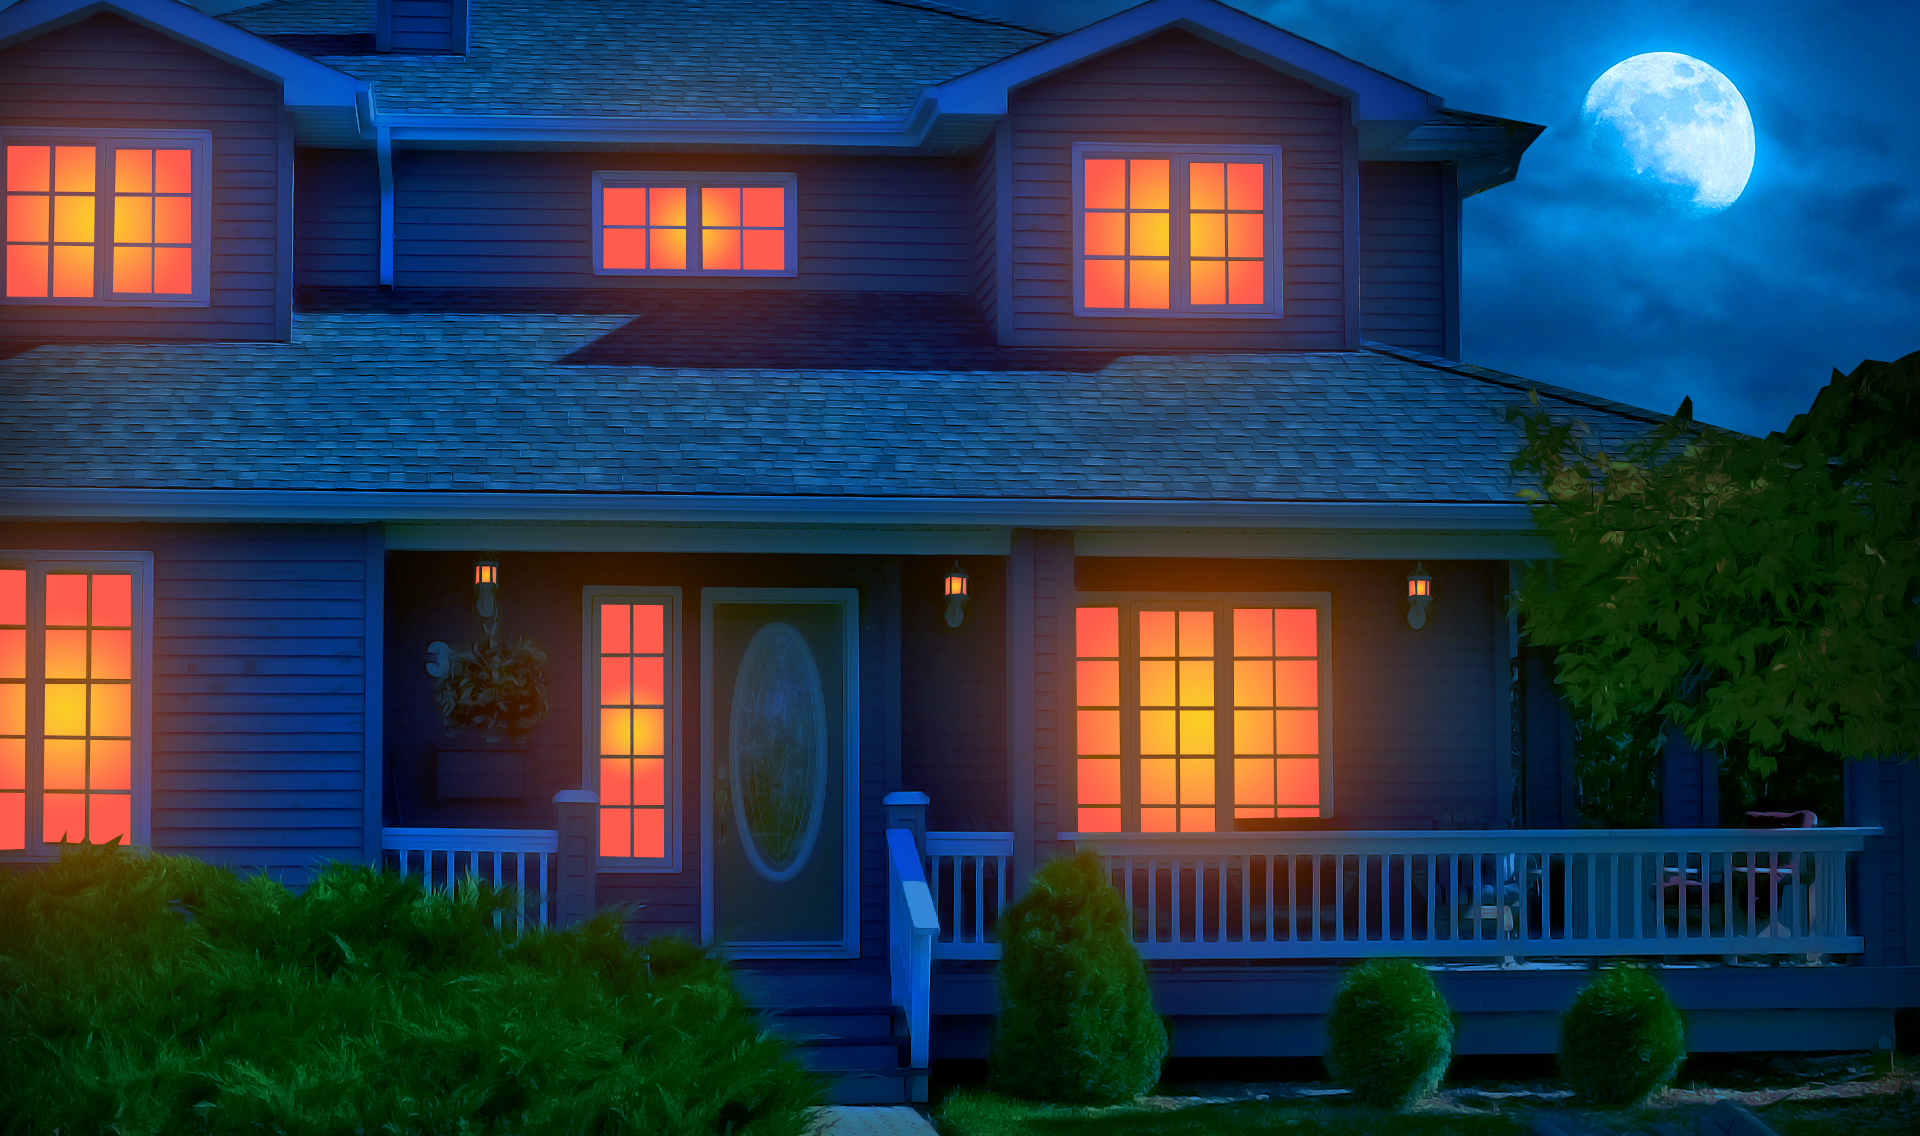 EXT. WOODEN HOUSE FRONT – NIGHT